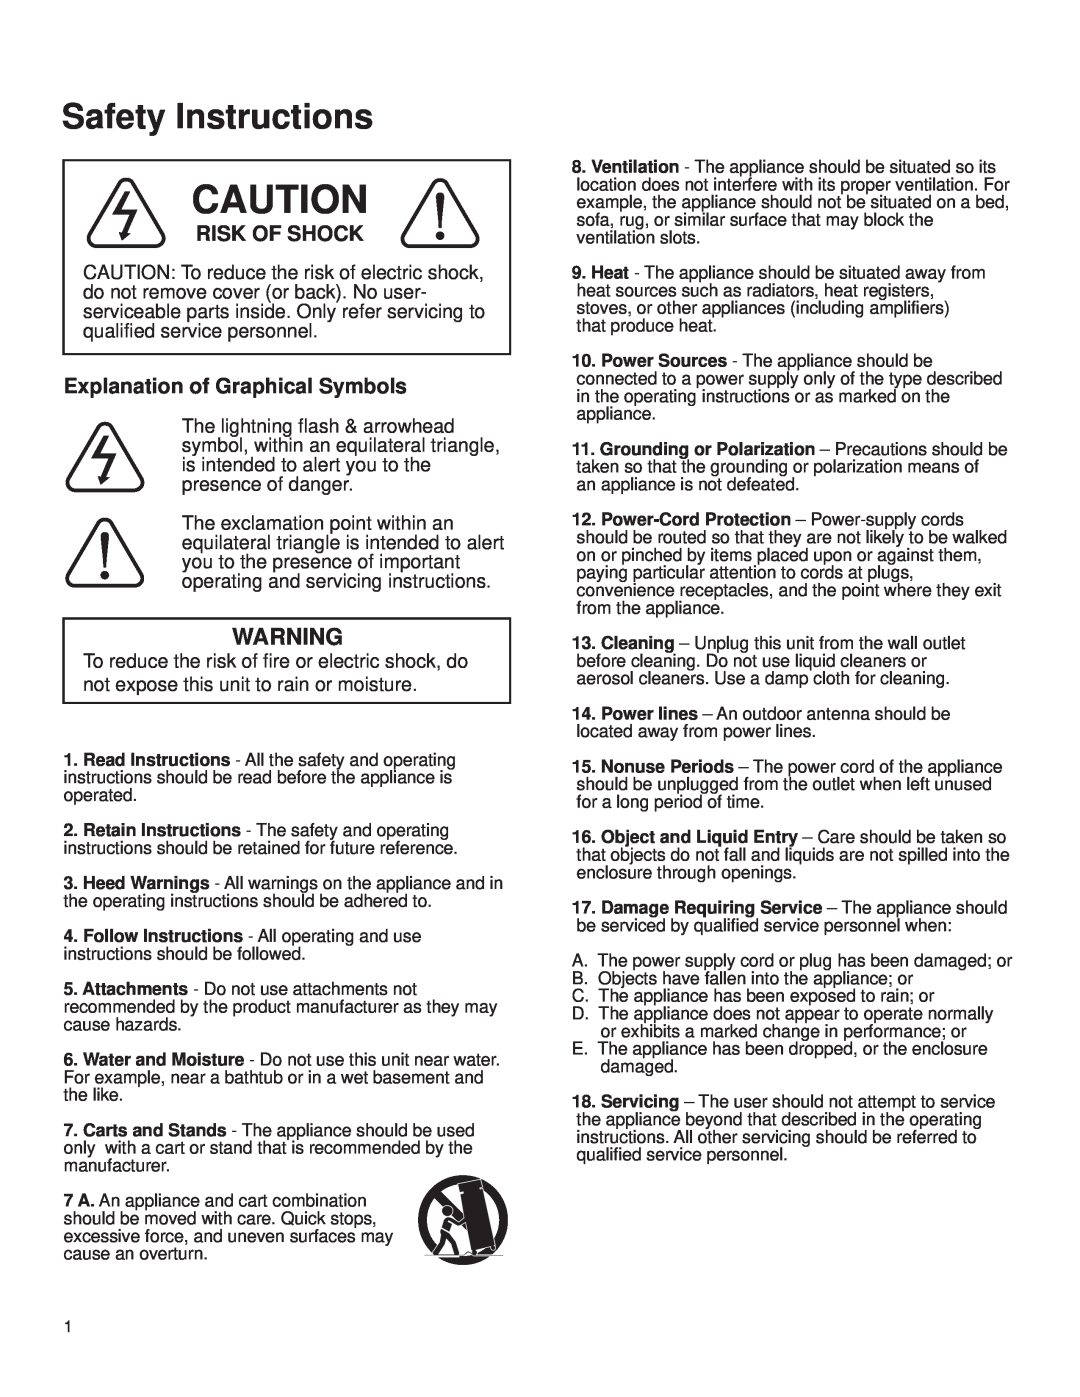 VocoPro DA-3600Pro2 owner manual Safety Instructions, Risk Of Shock, Explanation of Graphical Symbols 